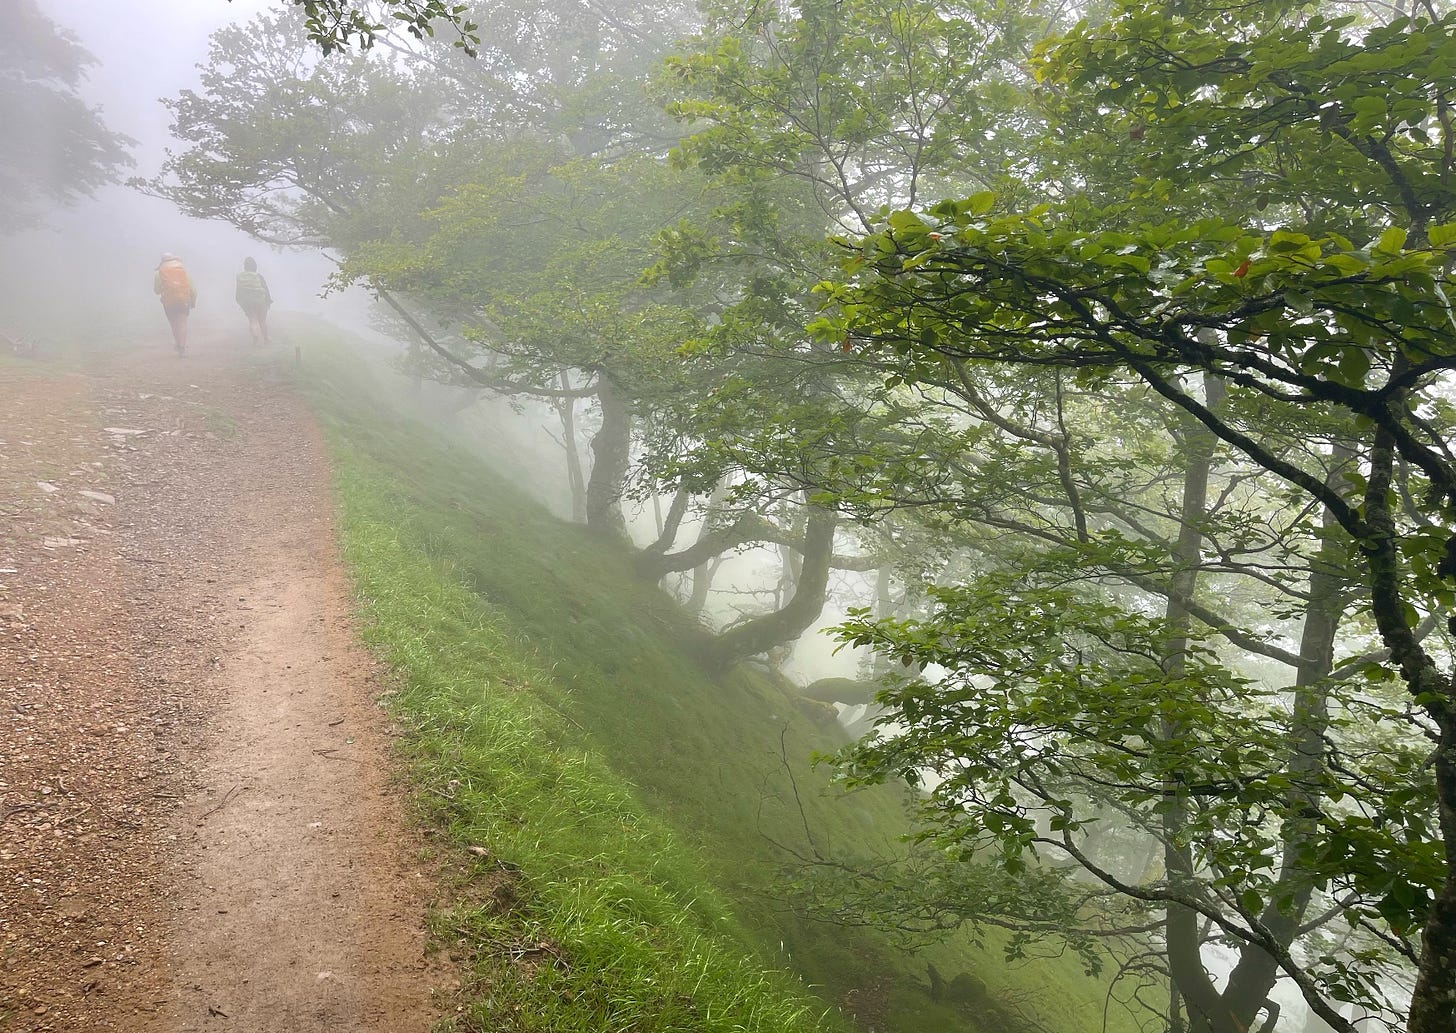 two pilgrims in the mist ahead of me, steep slope with trees on my right. I still recognize the walkers, two women from Italy who reached Sanitiago faster than anyone else I started with